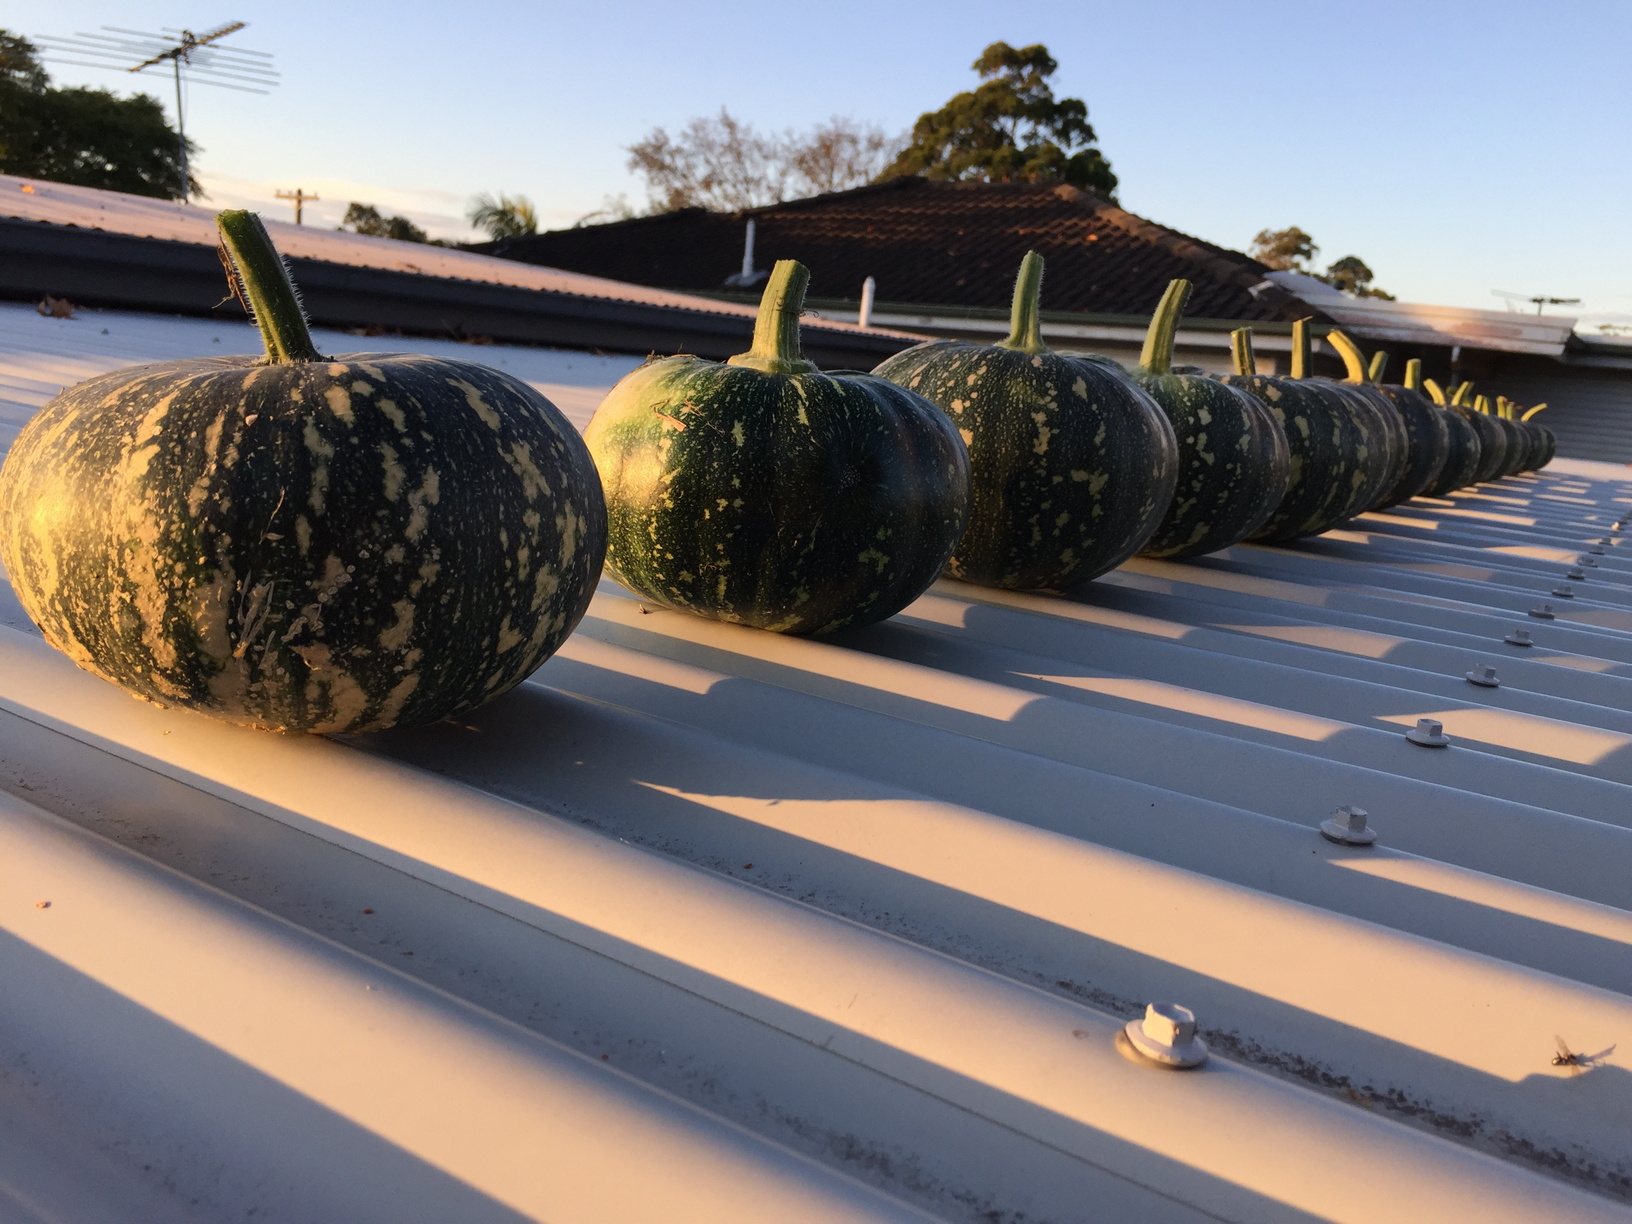 Kent pumpkins on the tin roof to finish ripening and to protect them from rats or other creatures than might eat them if left on the vine on the ground. They can stay up on the roof for months, especially if the weather is not too hot. Keeps them out the way and out of harm's way.